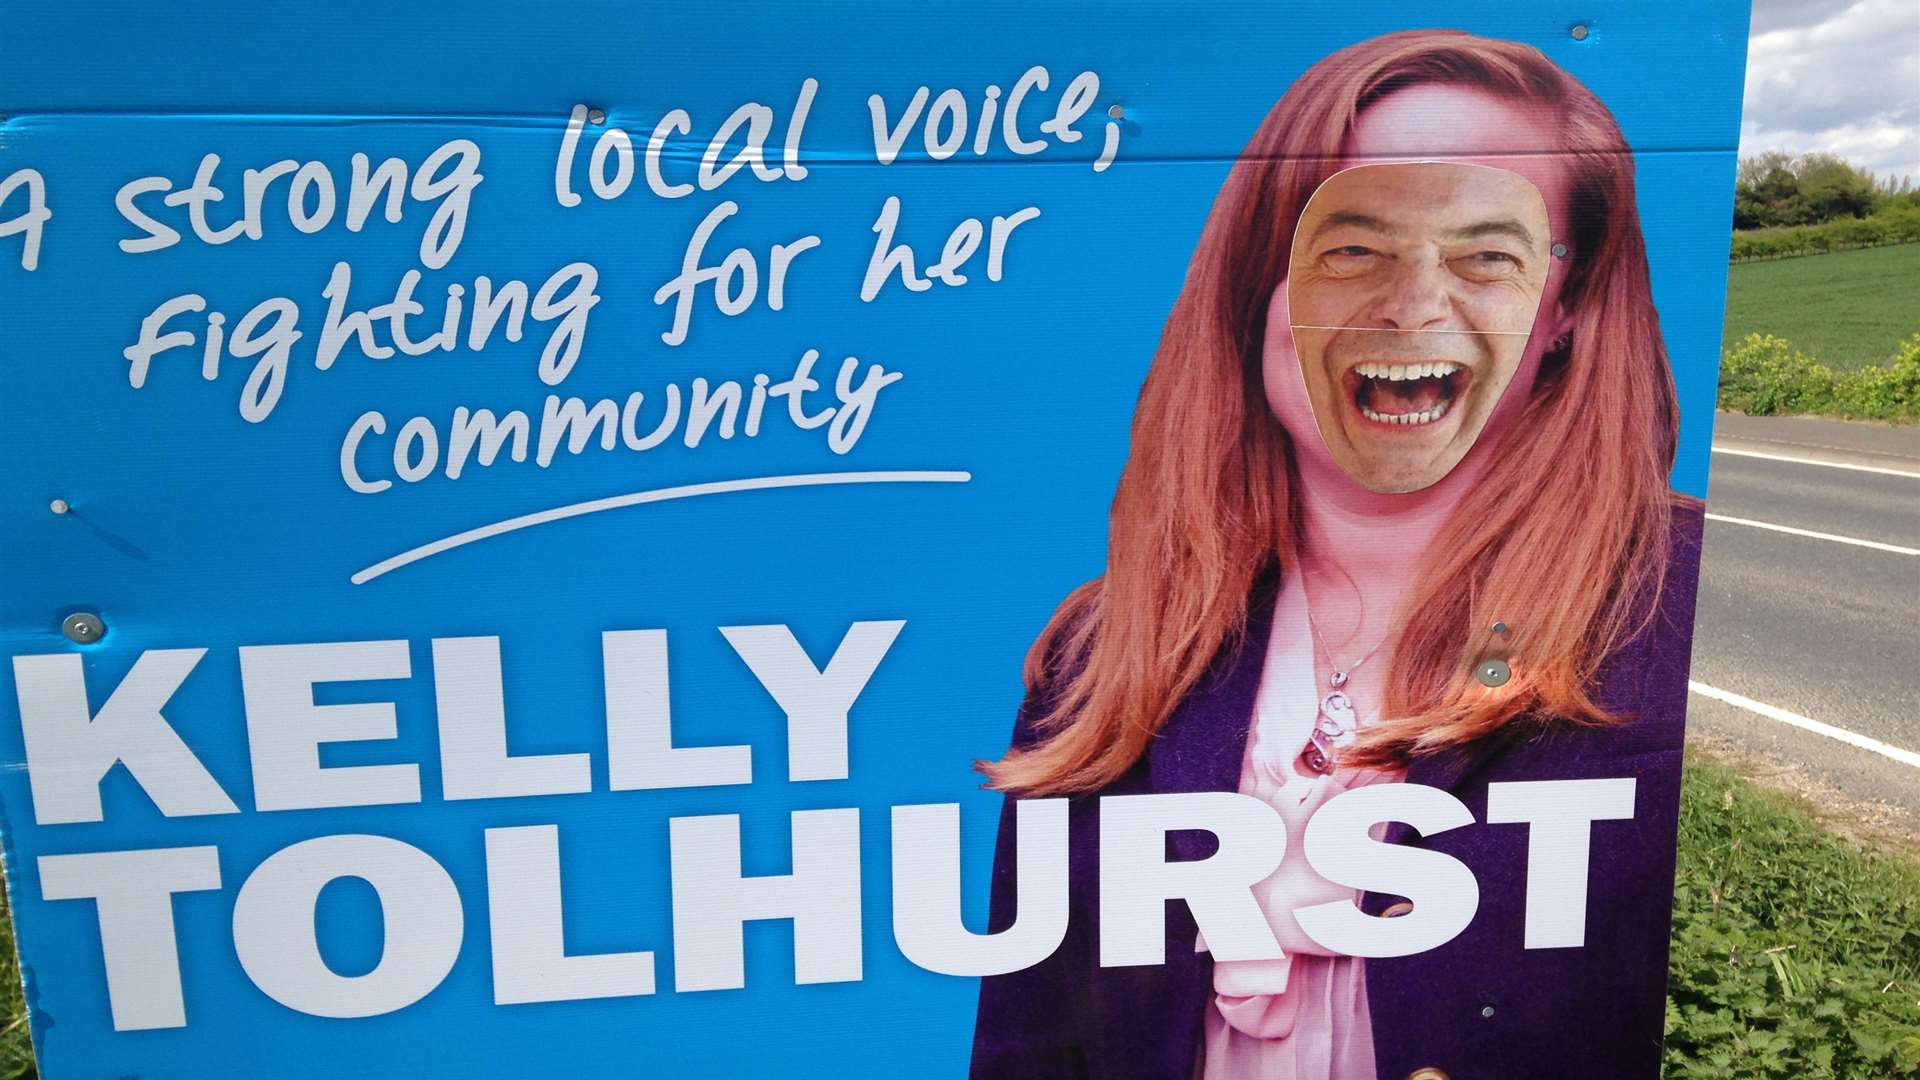 Nigel Farage's face was plastered over Kelly Tolhurst's on this election poster near Wainscott